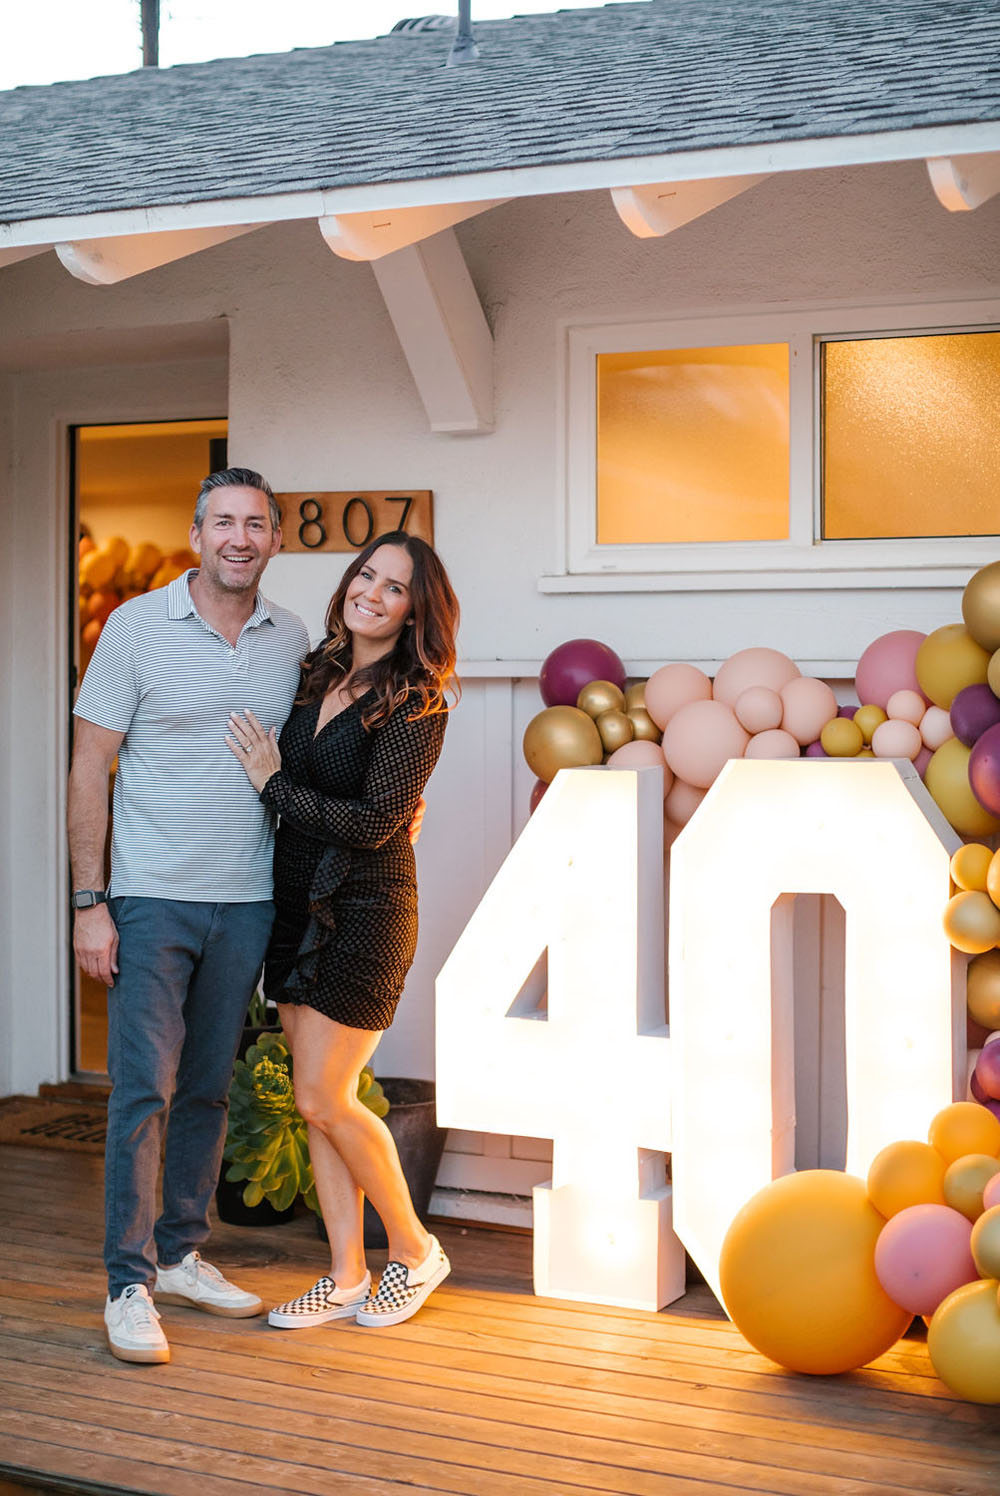 40th birthday marquee sign and balloons